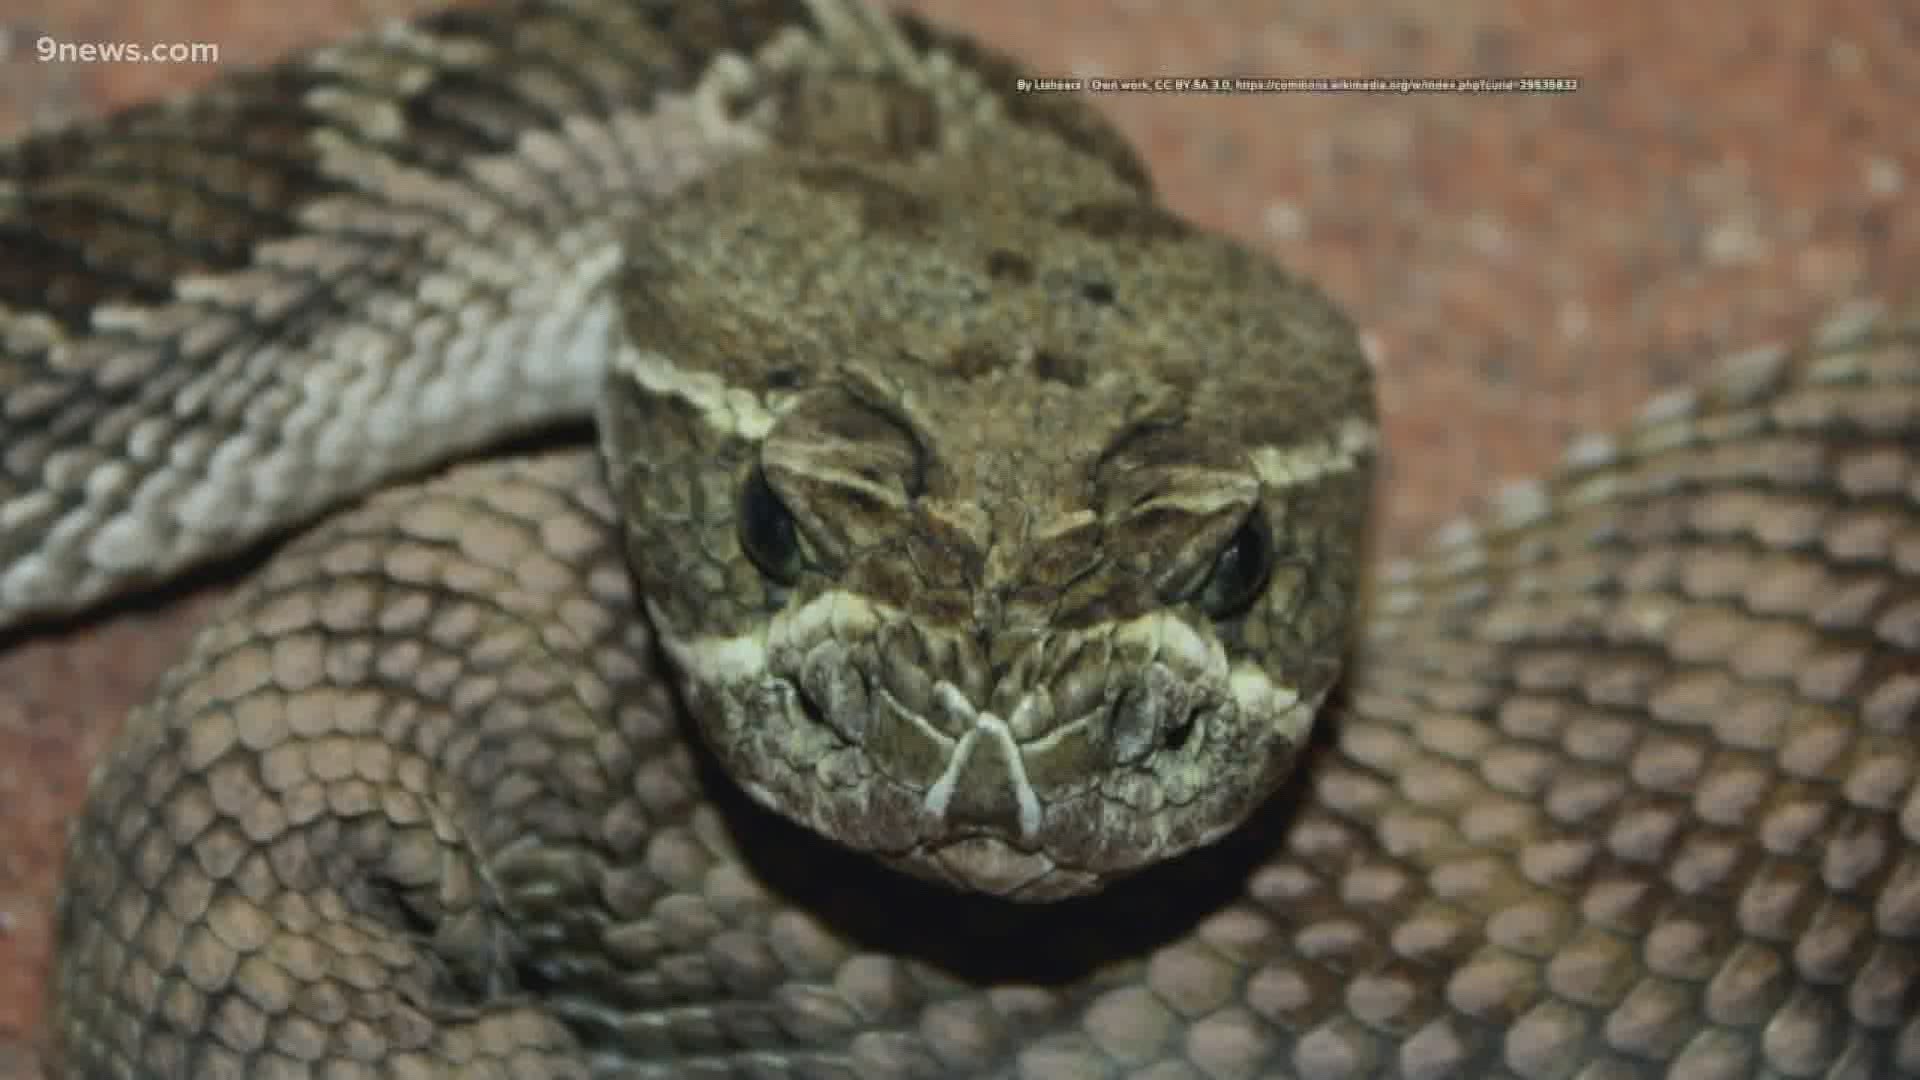 can rattlesnakes kill you